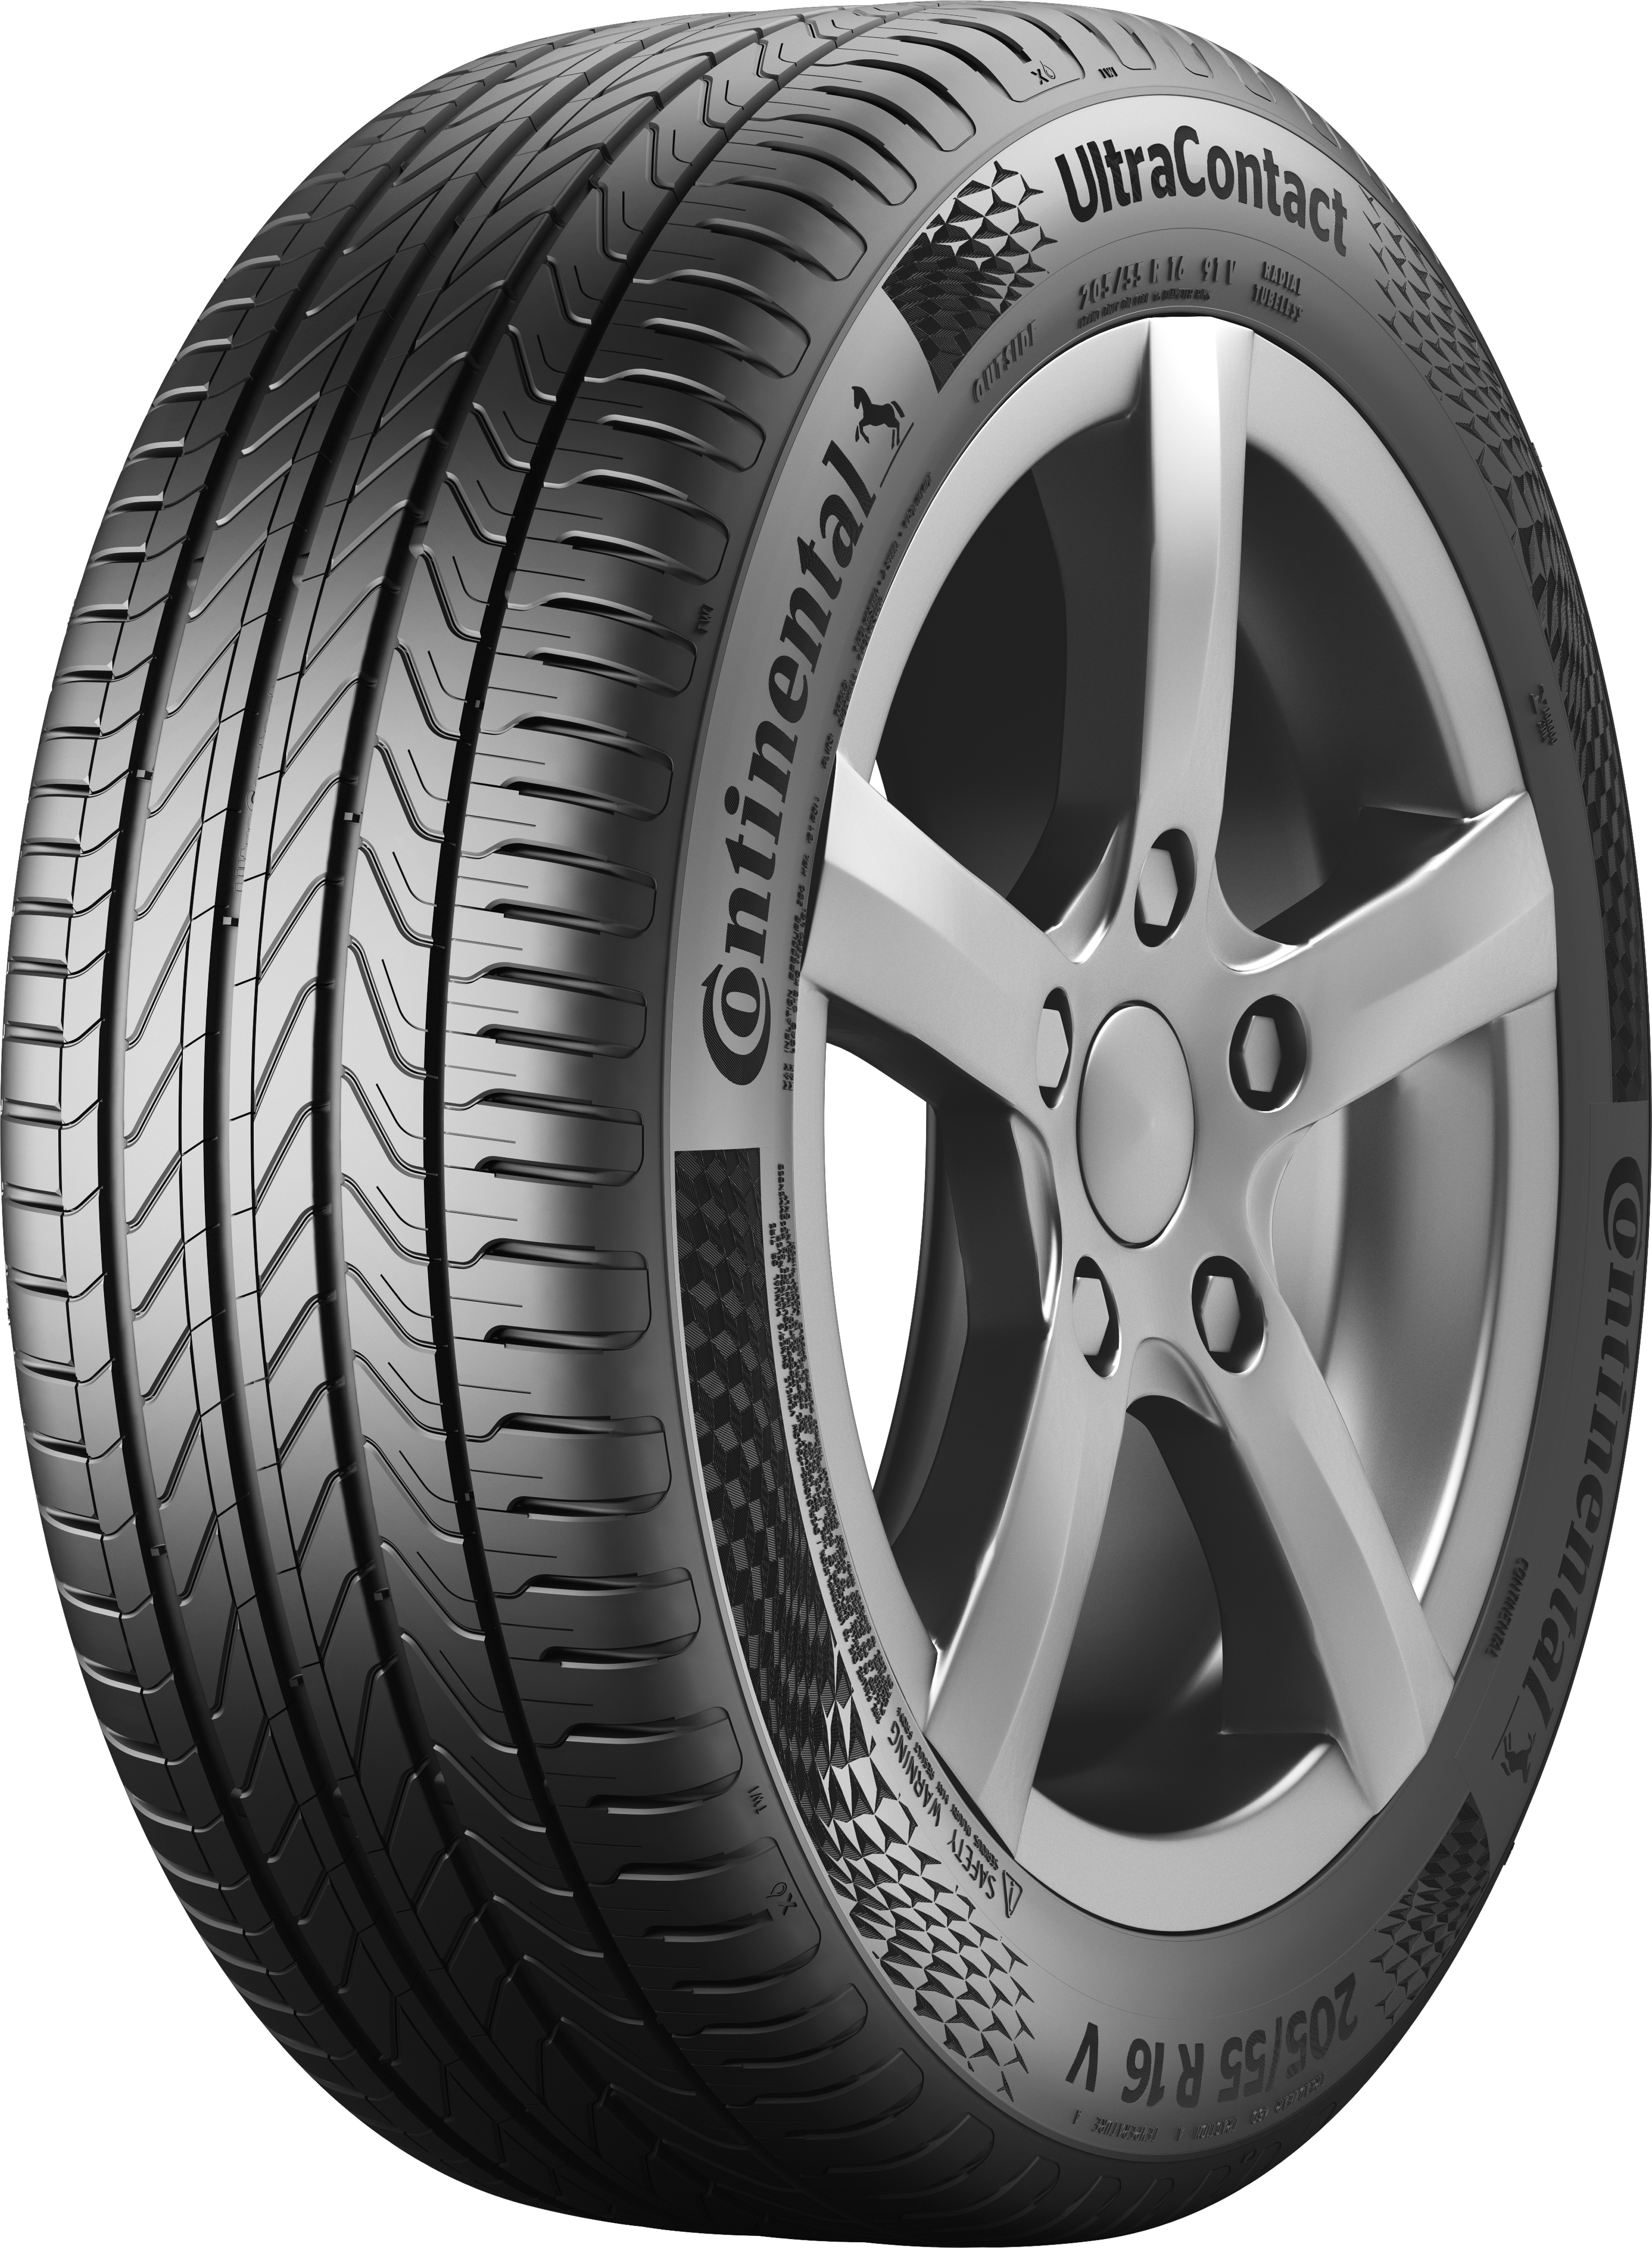 The new Continental UltraContact summer tire - Continental AG